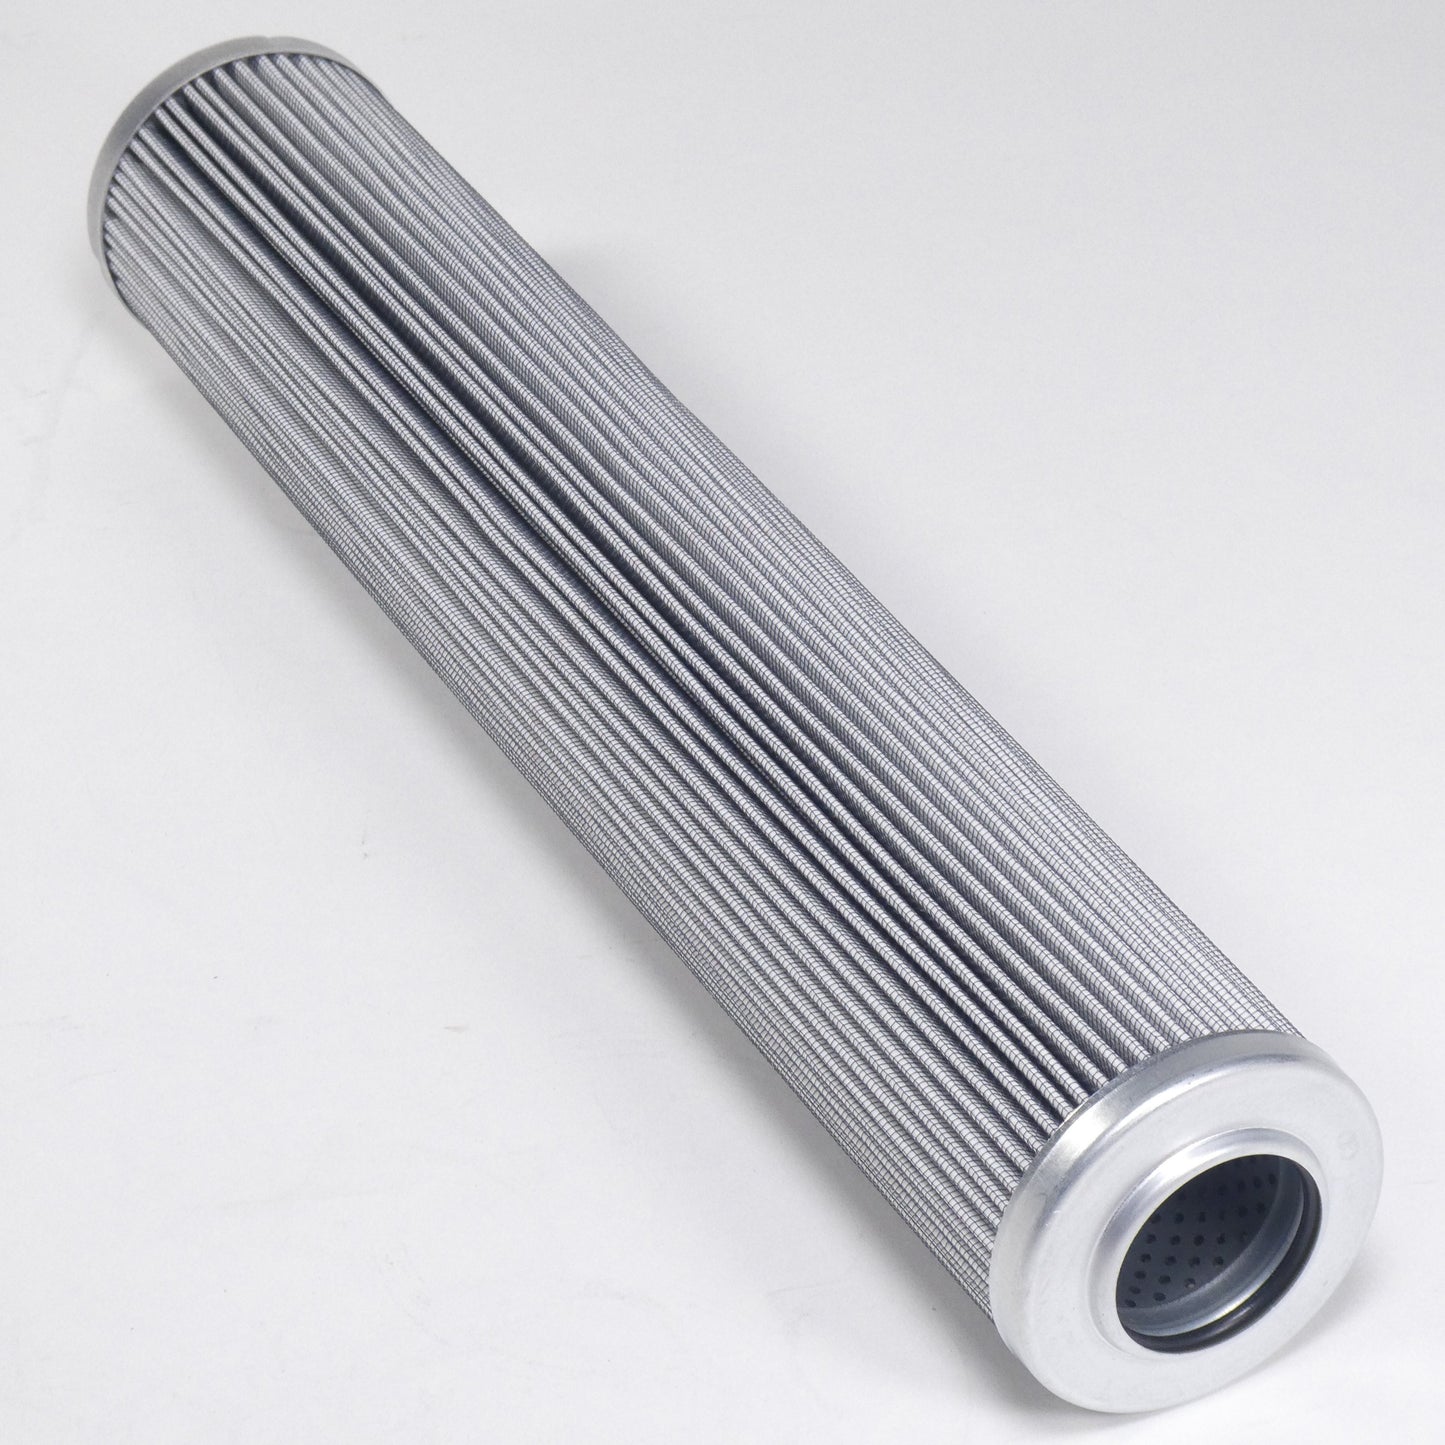 Hydrafil Replacement Filter Element for Filtersoft M69616MCV